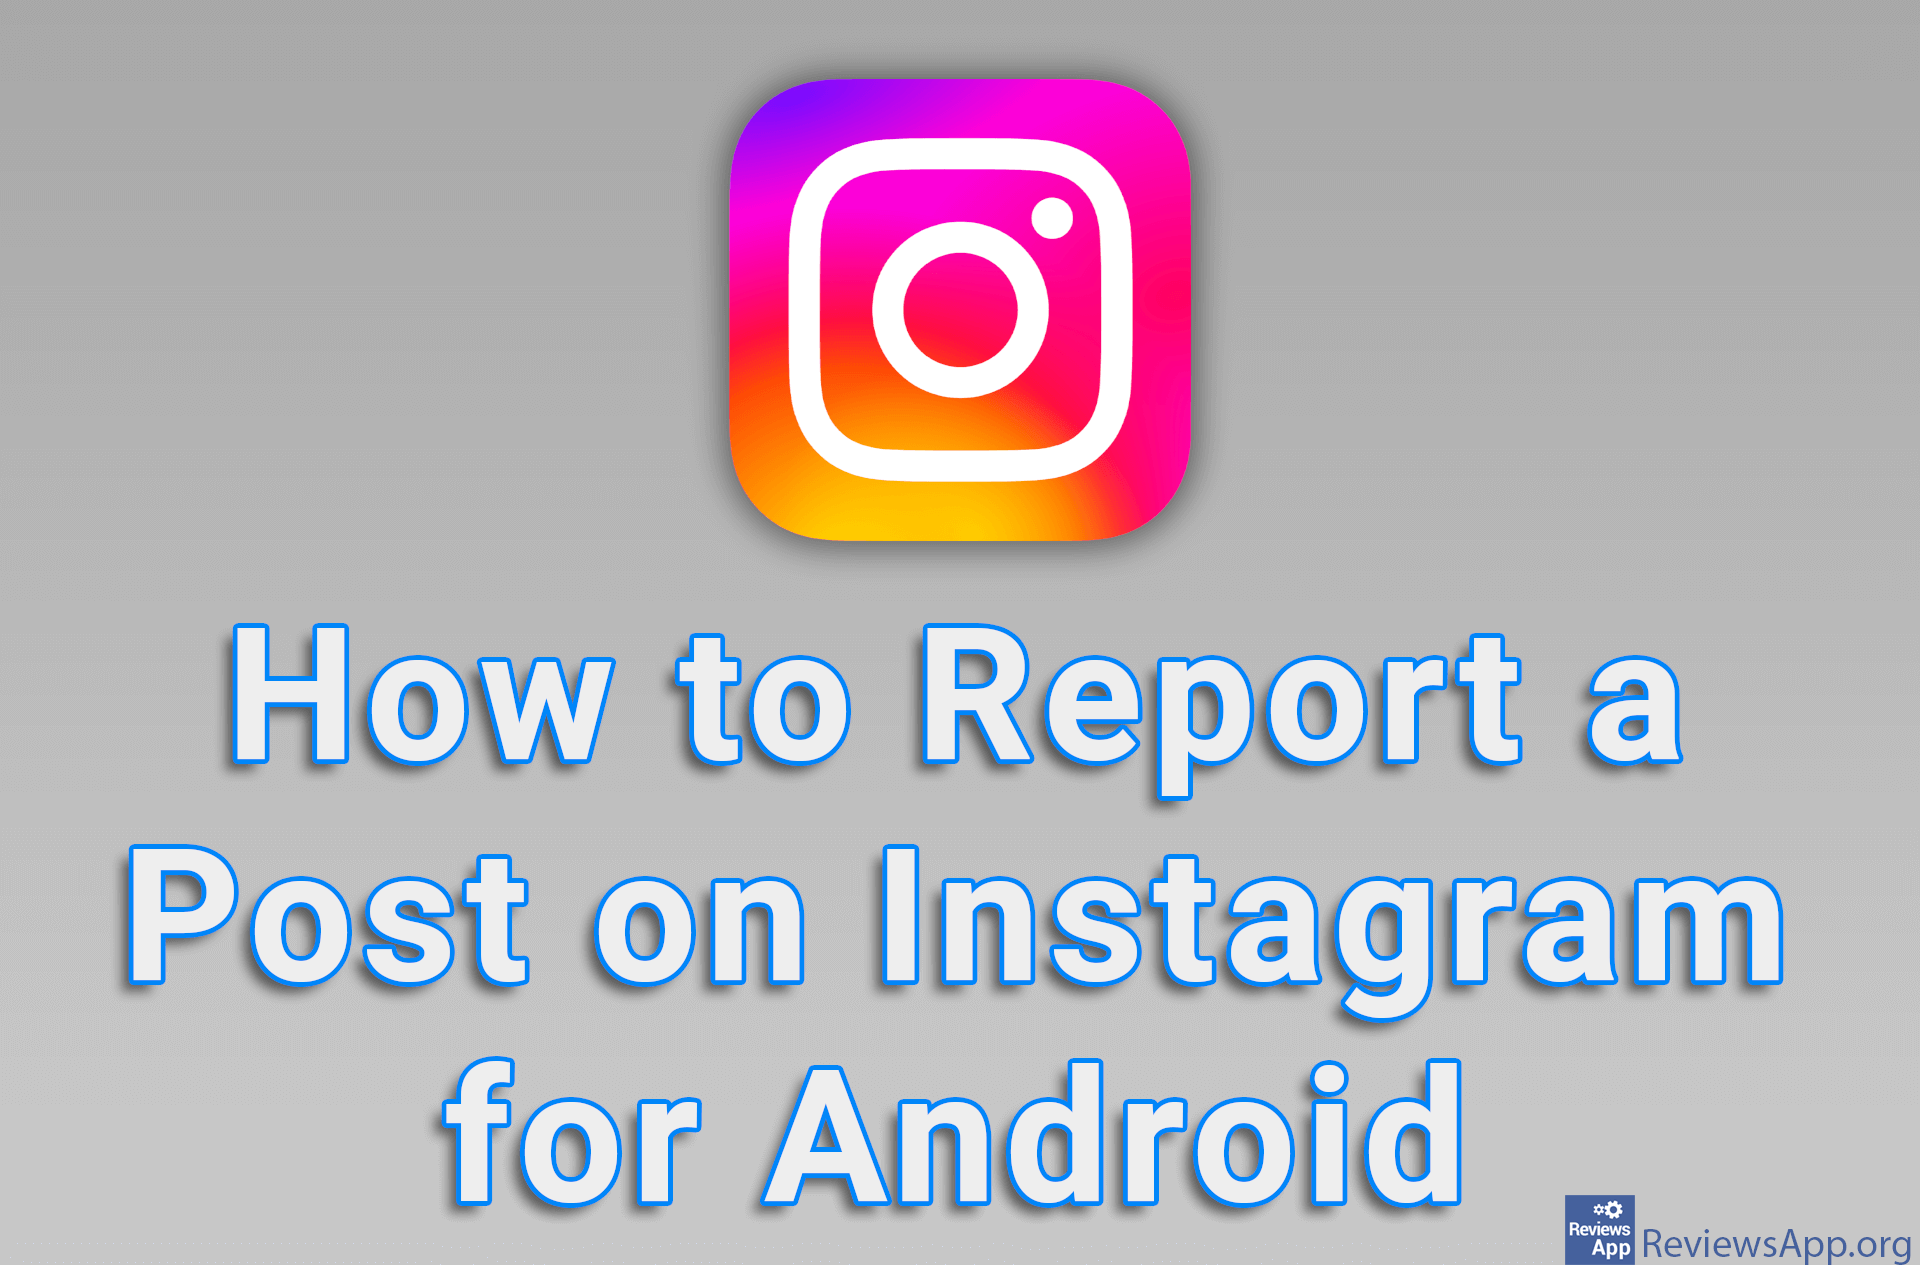 How to Report a Post on Instagram for Android